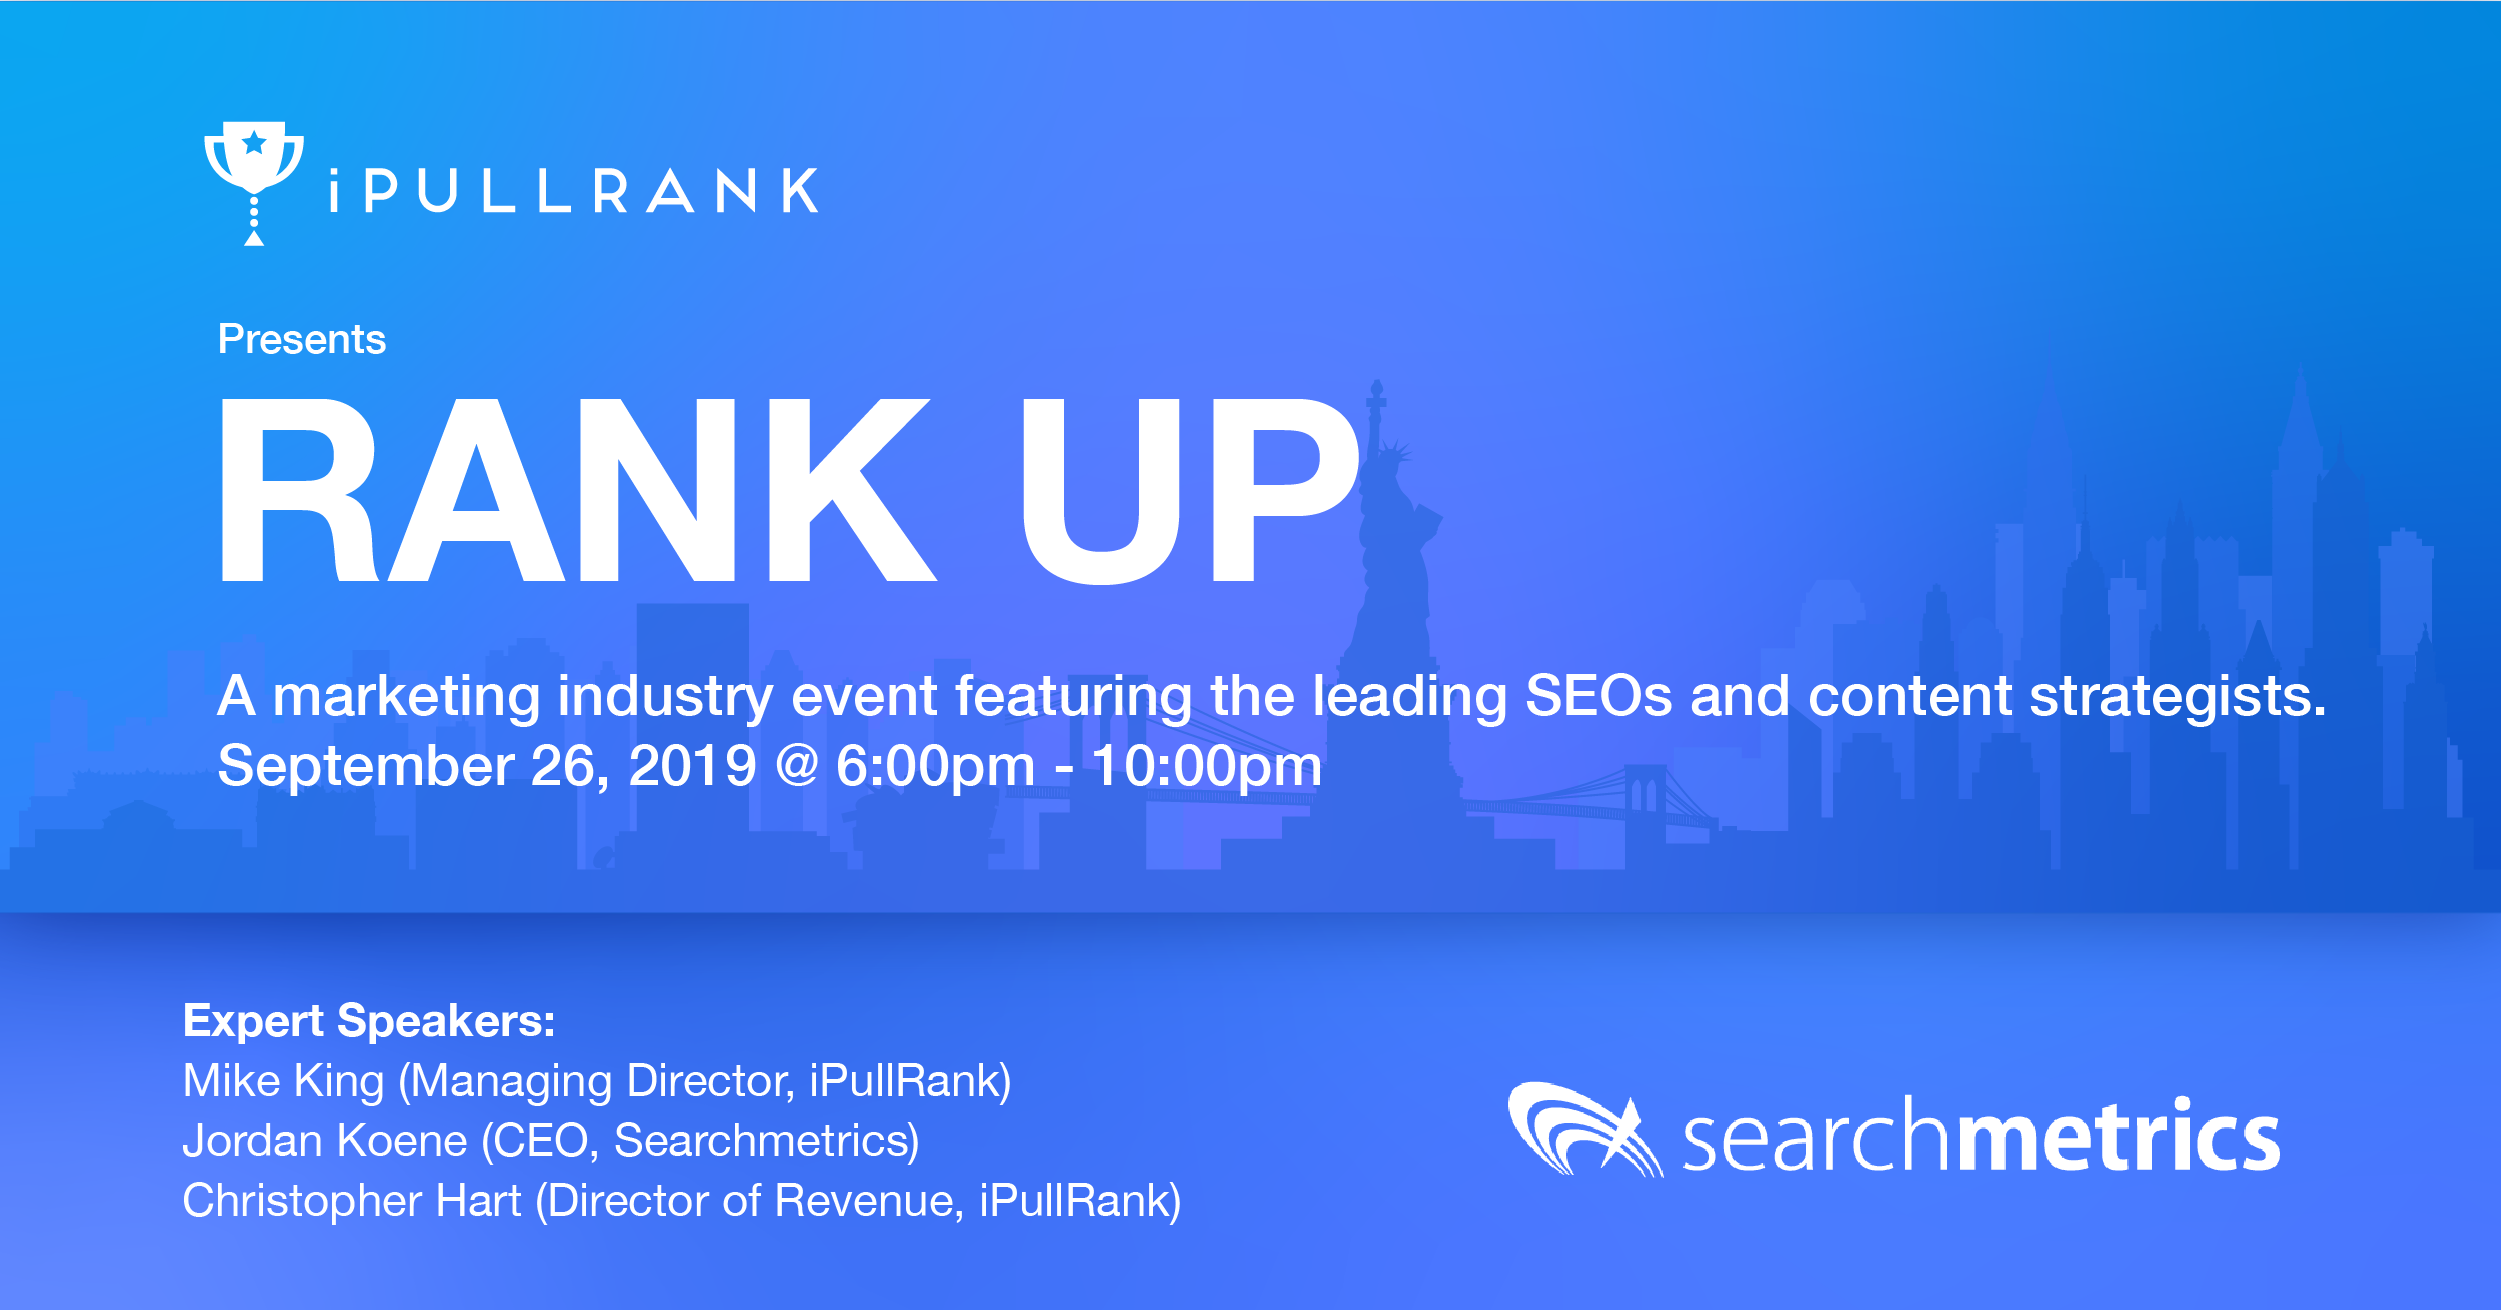 IPULLRANK Presents Rank UP marketing industry and networking event featuring Searchmetrics